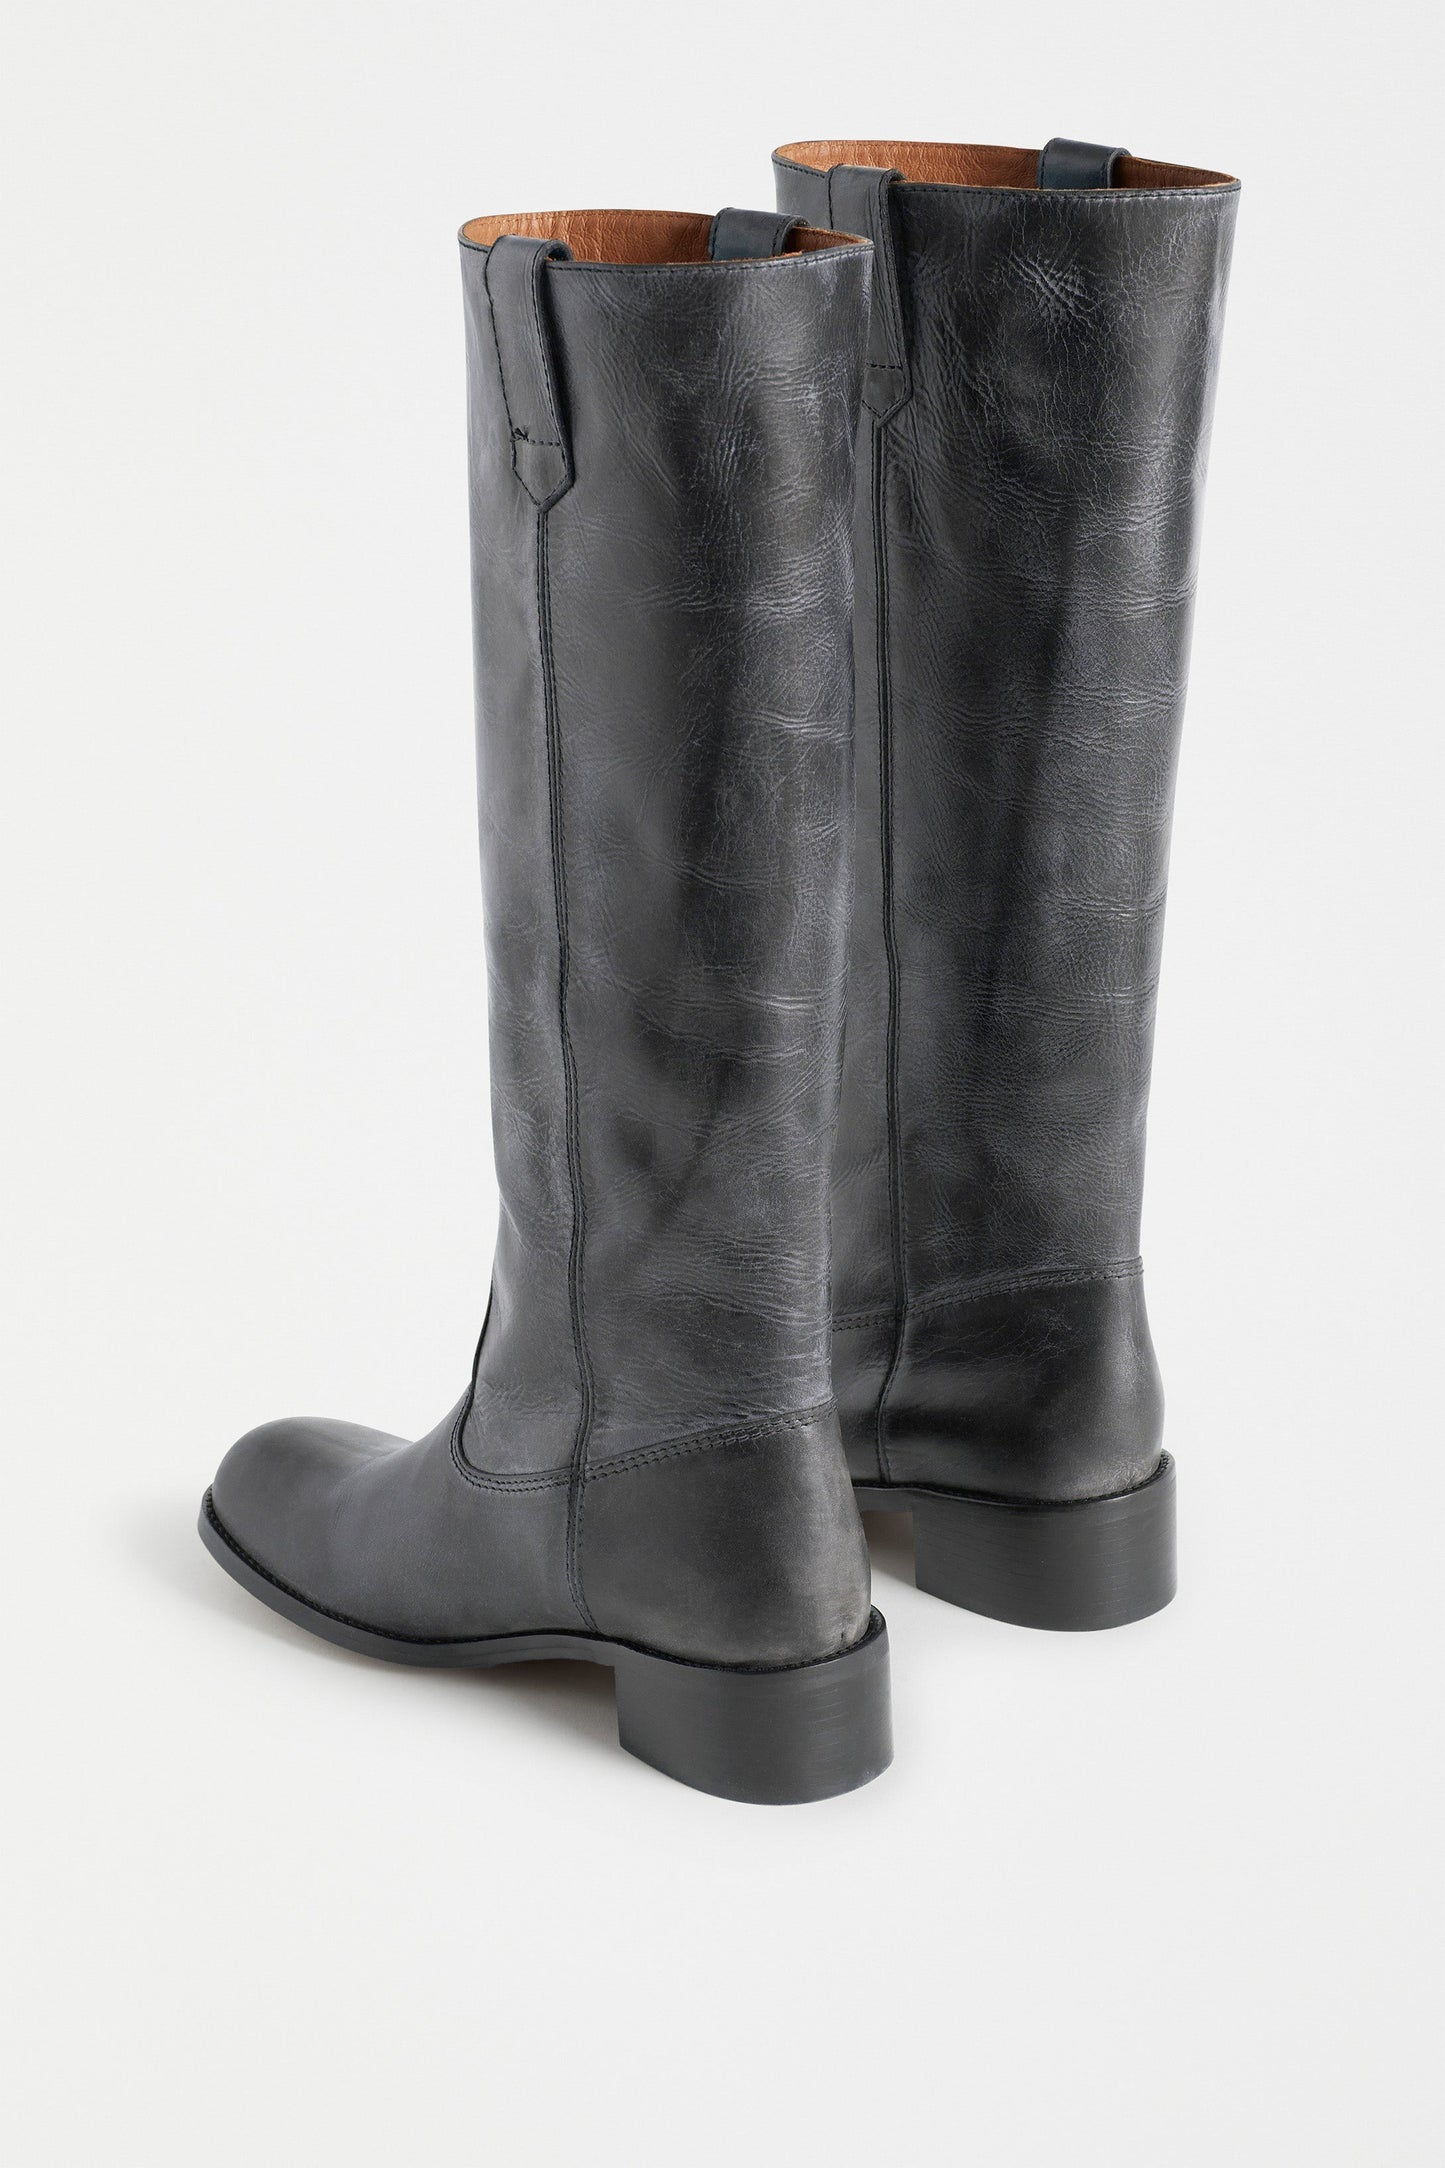 Anna Escovado Natural Worn Look Knee High Leather Boots Angled Back | BLACK